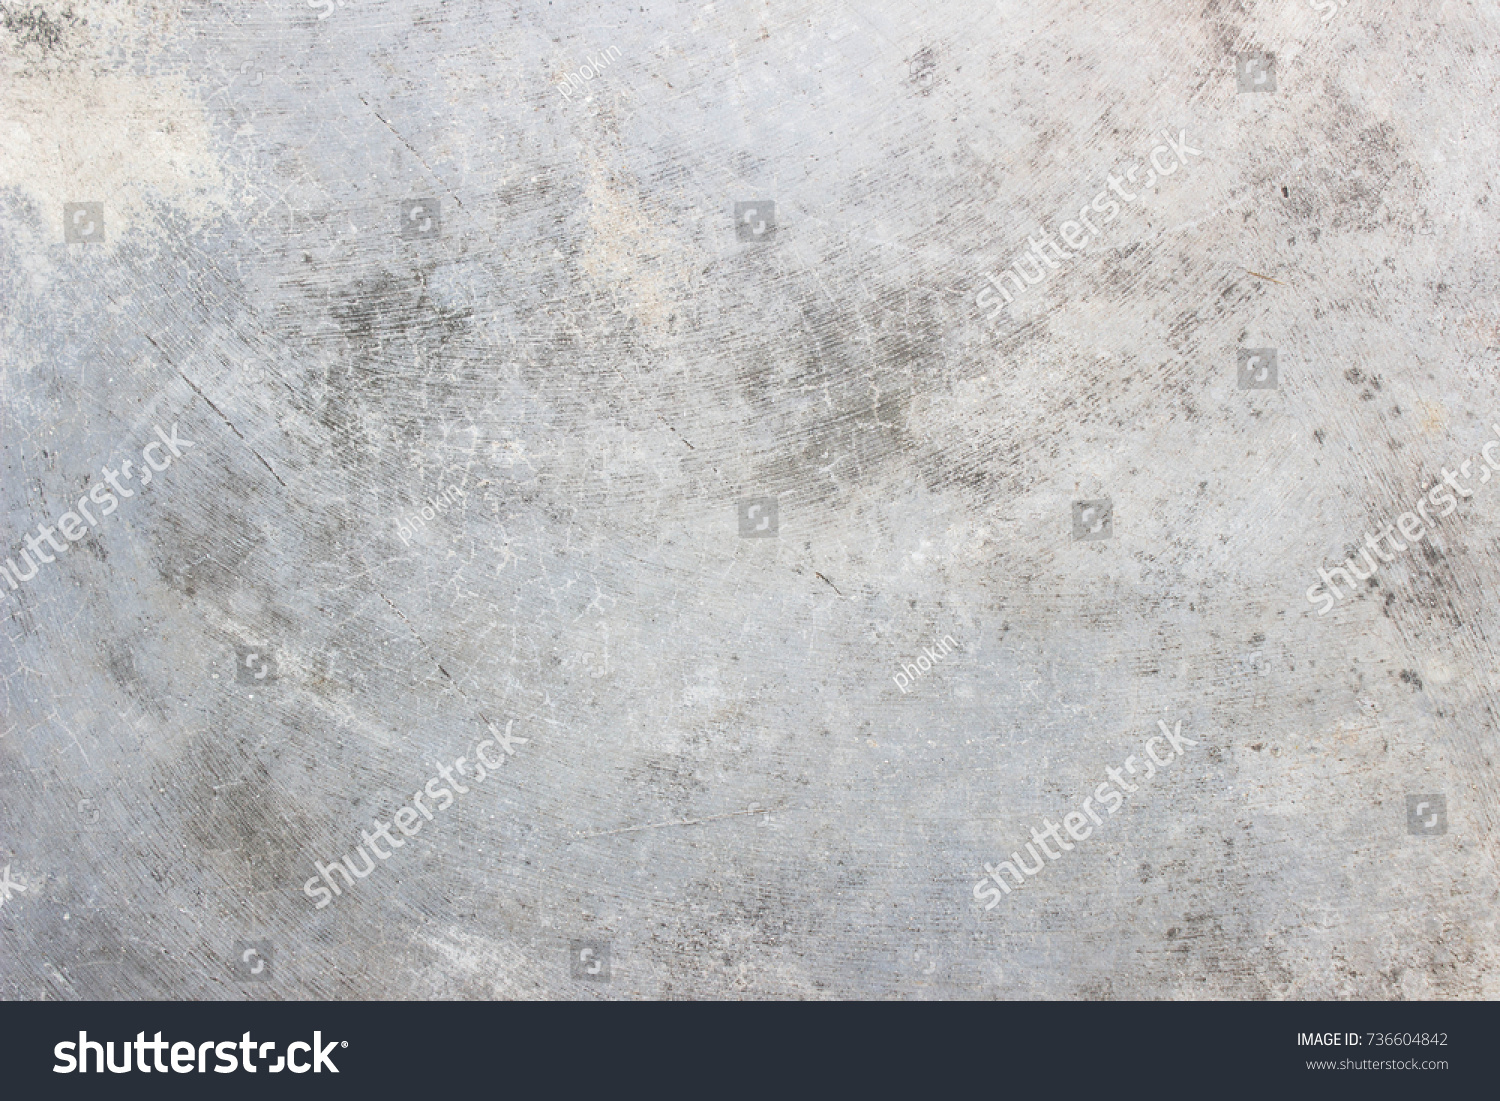 Old concrete texture seamless wall background. #736604842